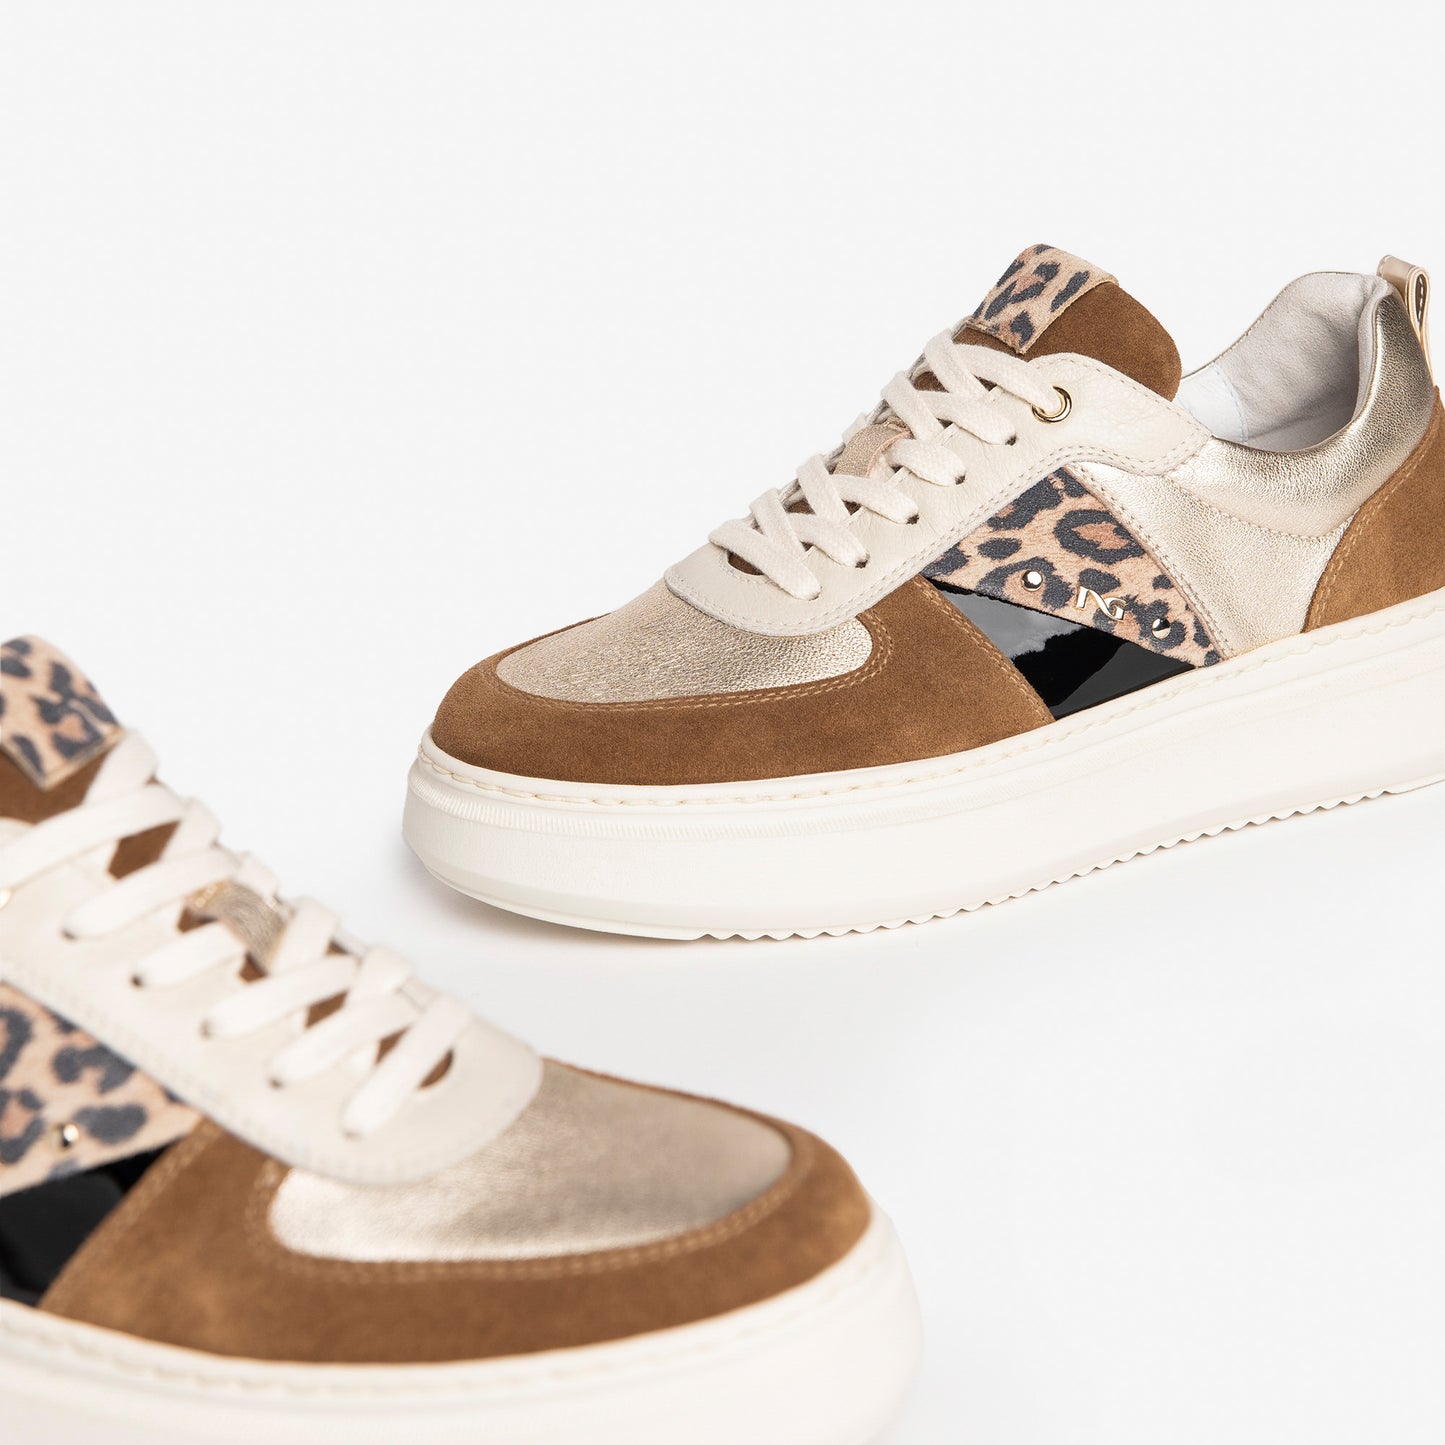 Sneakers NeroGiardini woman brown suede and leather animalier